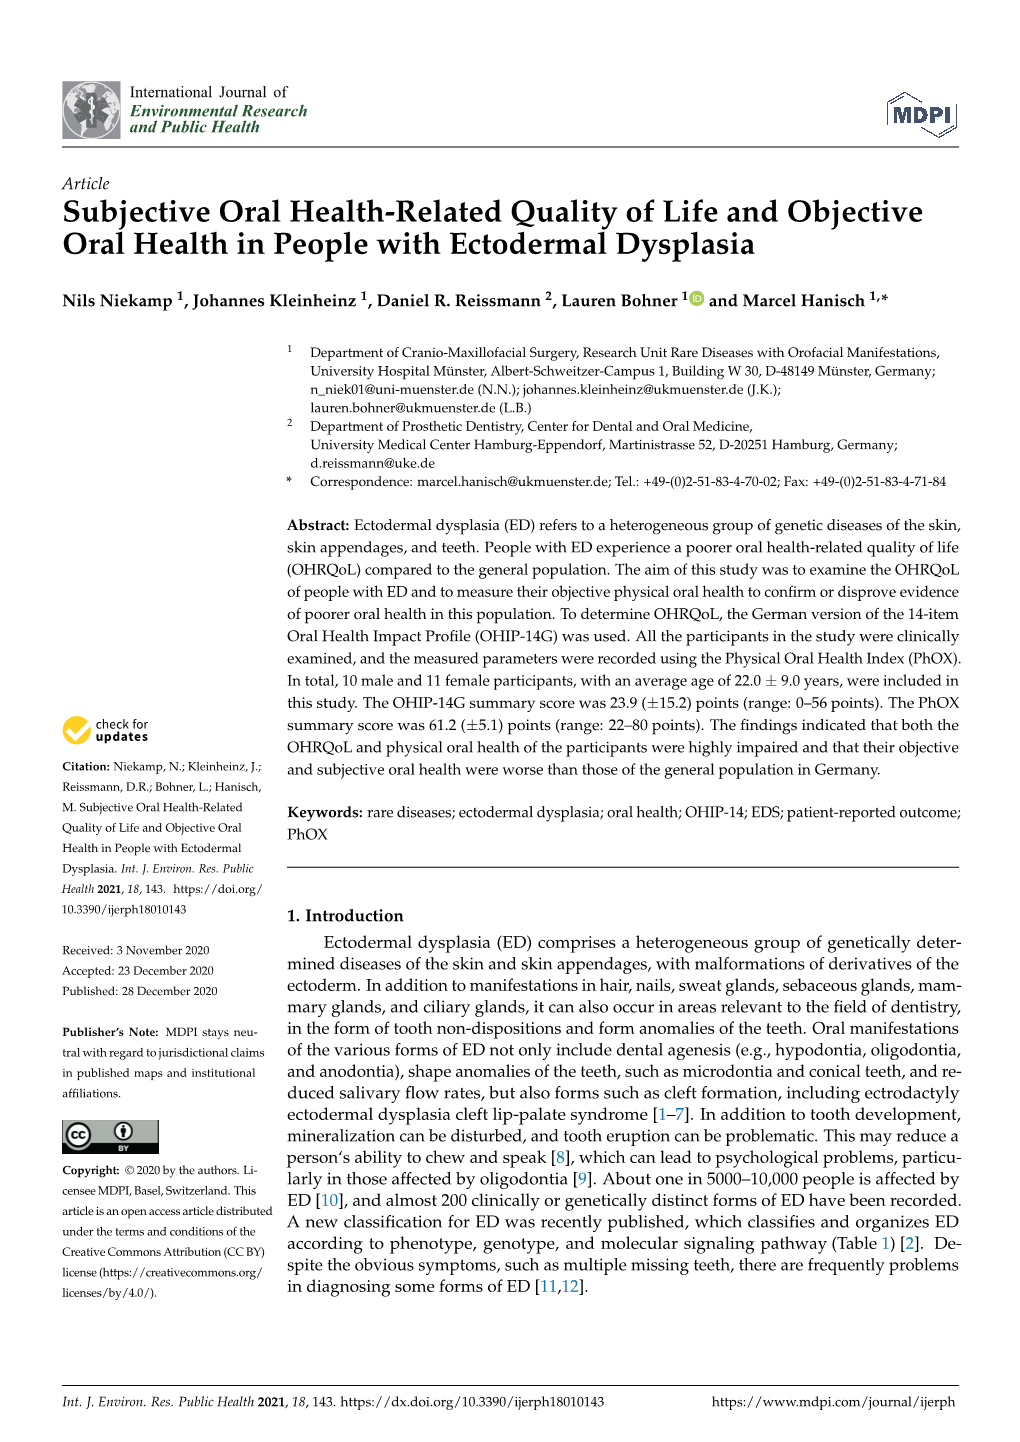 Subjective Oral Health-Related Quality of Life and Objective Oral Health in People with Ectodermal Dysplasia